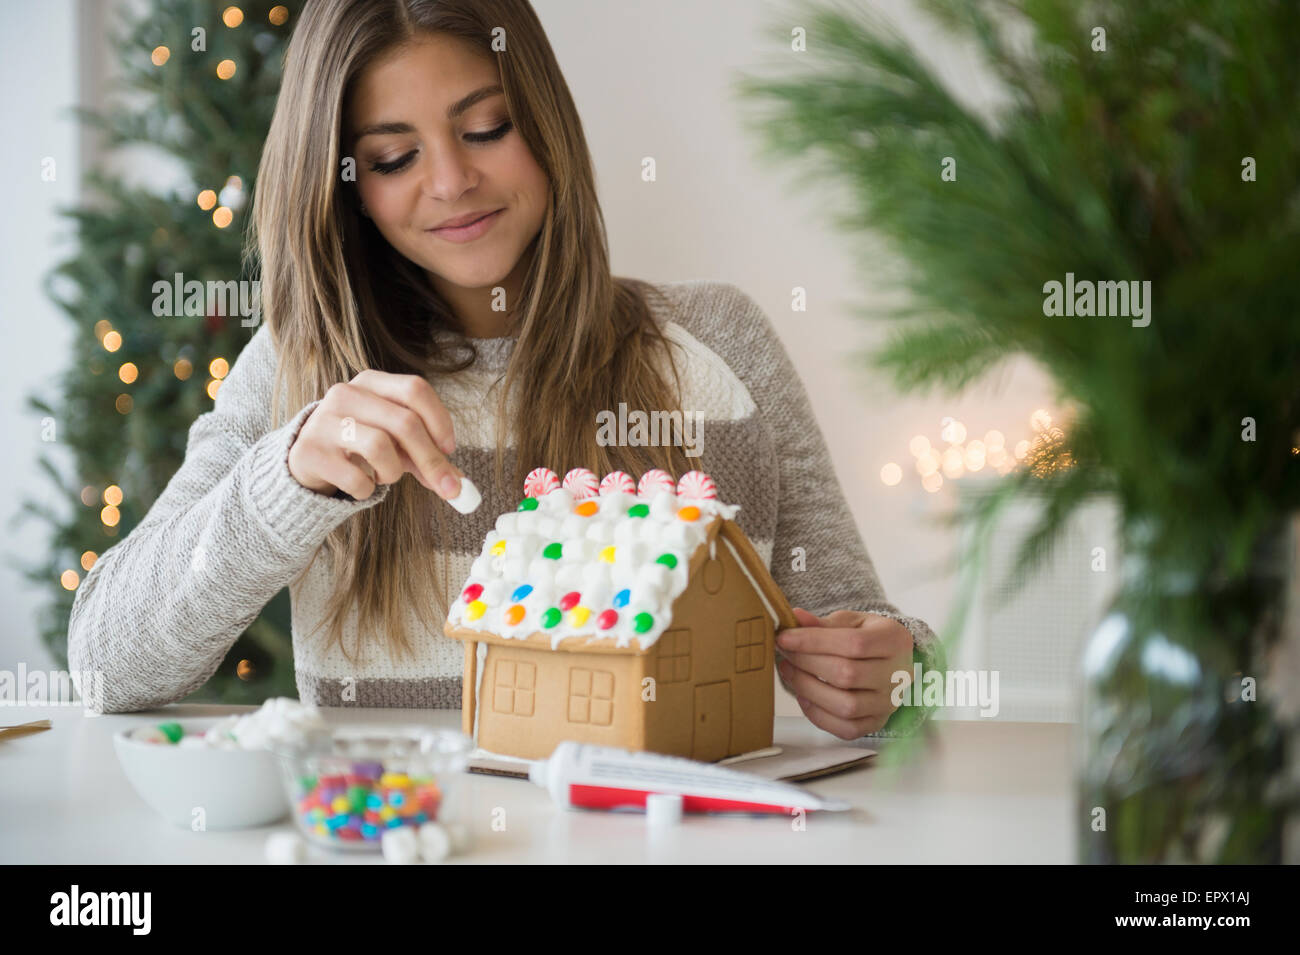 Young woman preparing gingerbread house Stock Photo